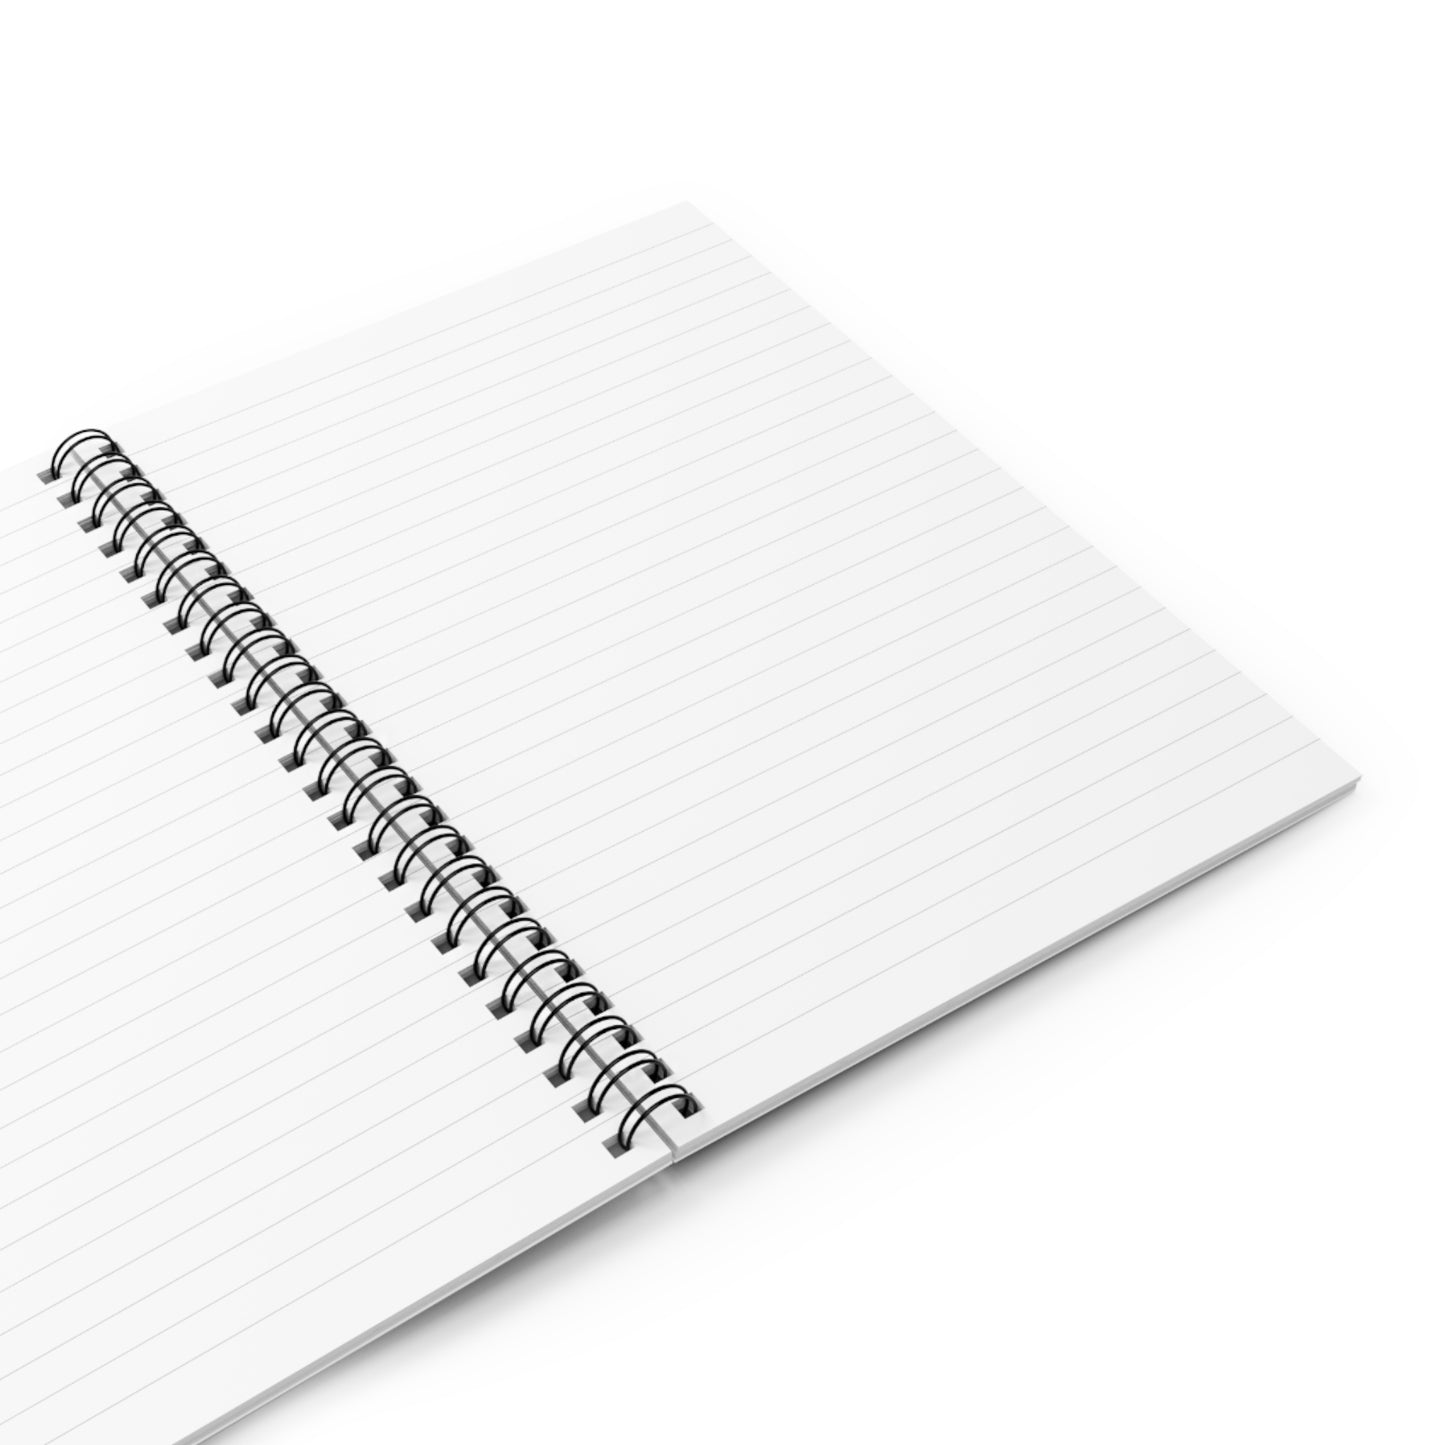 "Harmony in Repetition: A Post-Minimalist Exploration" - The Alien Spiral Notebook (Ruled Line) Post-minimalism